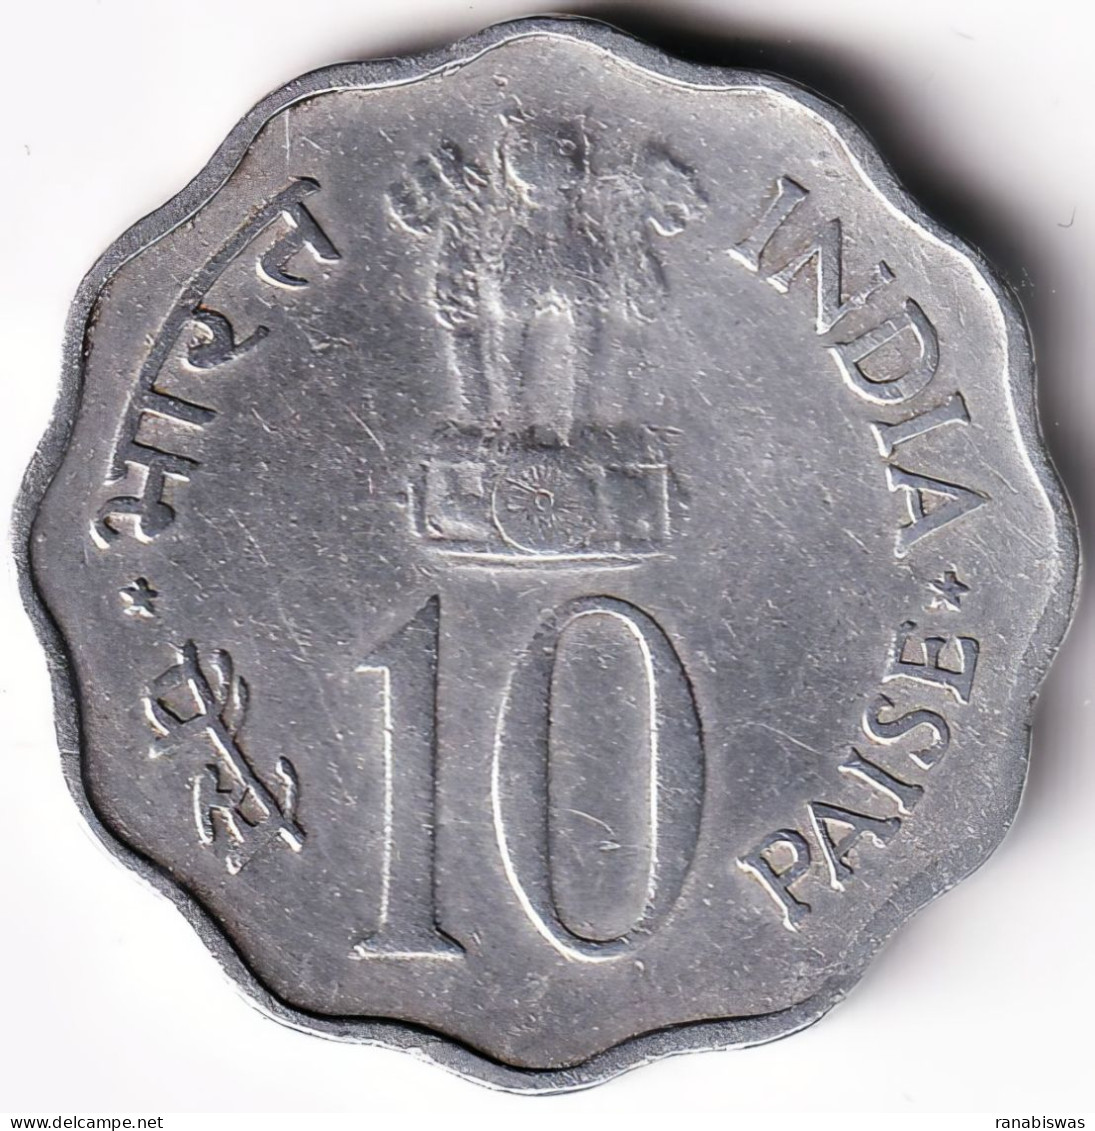 INDIA COIN LOT 91, 10 PAISE 1976, FOOD & WORK FOR ALL, FAO, BOMBAY MINT, XF - India